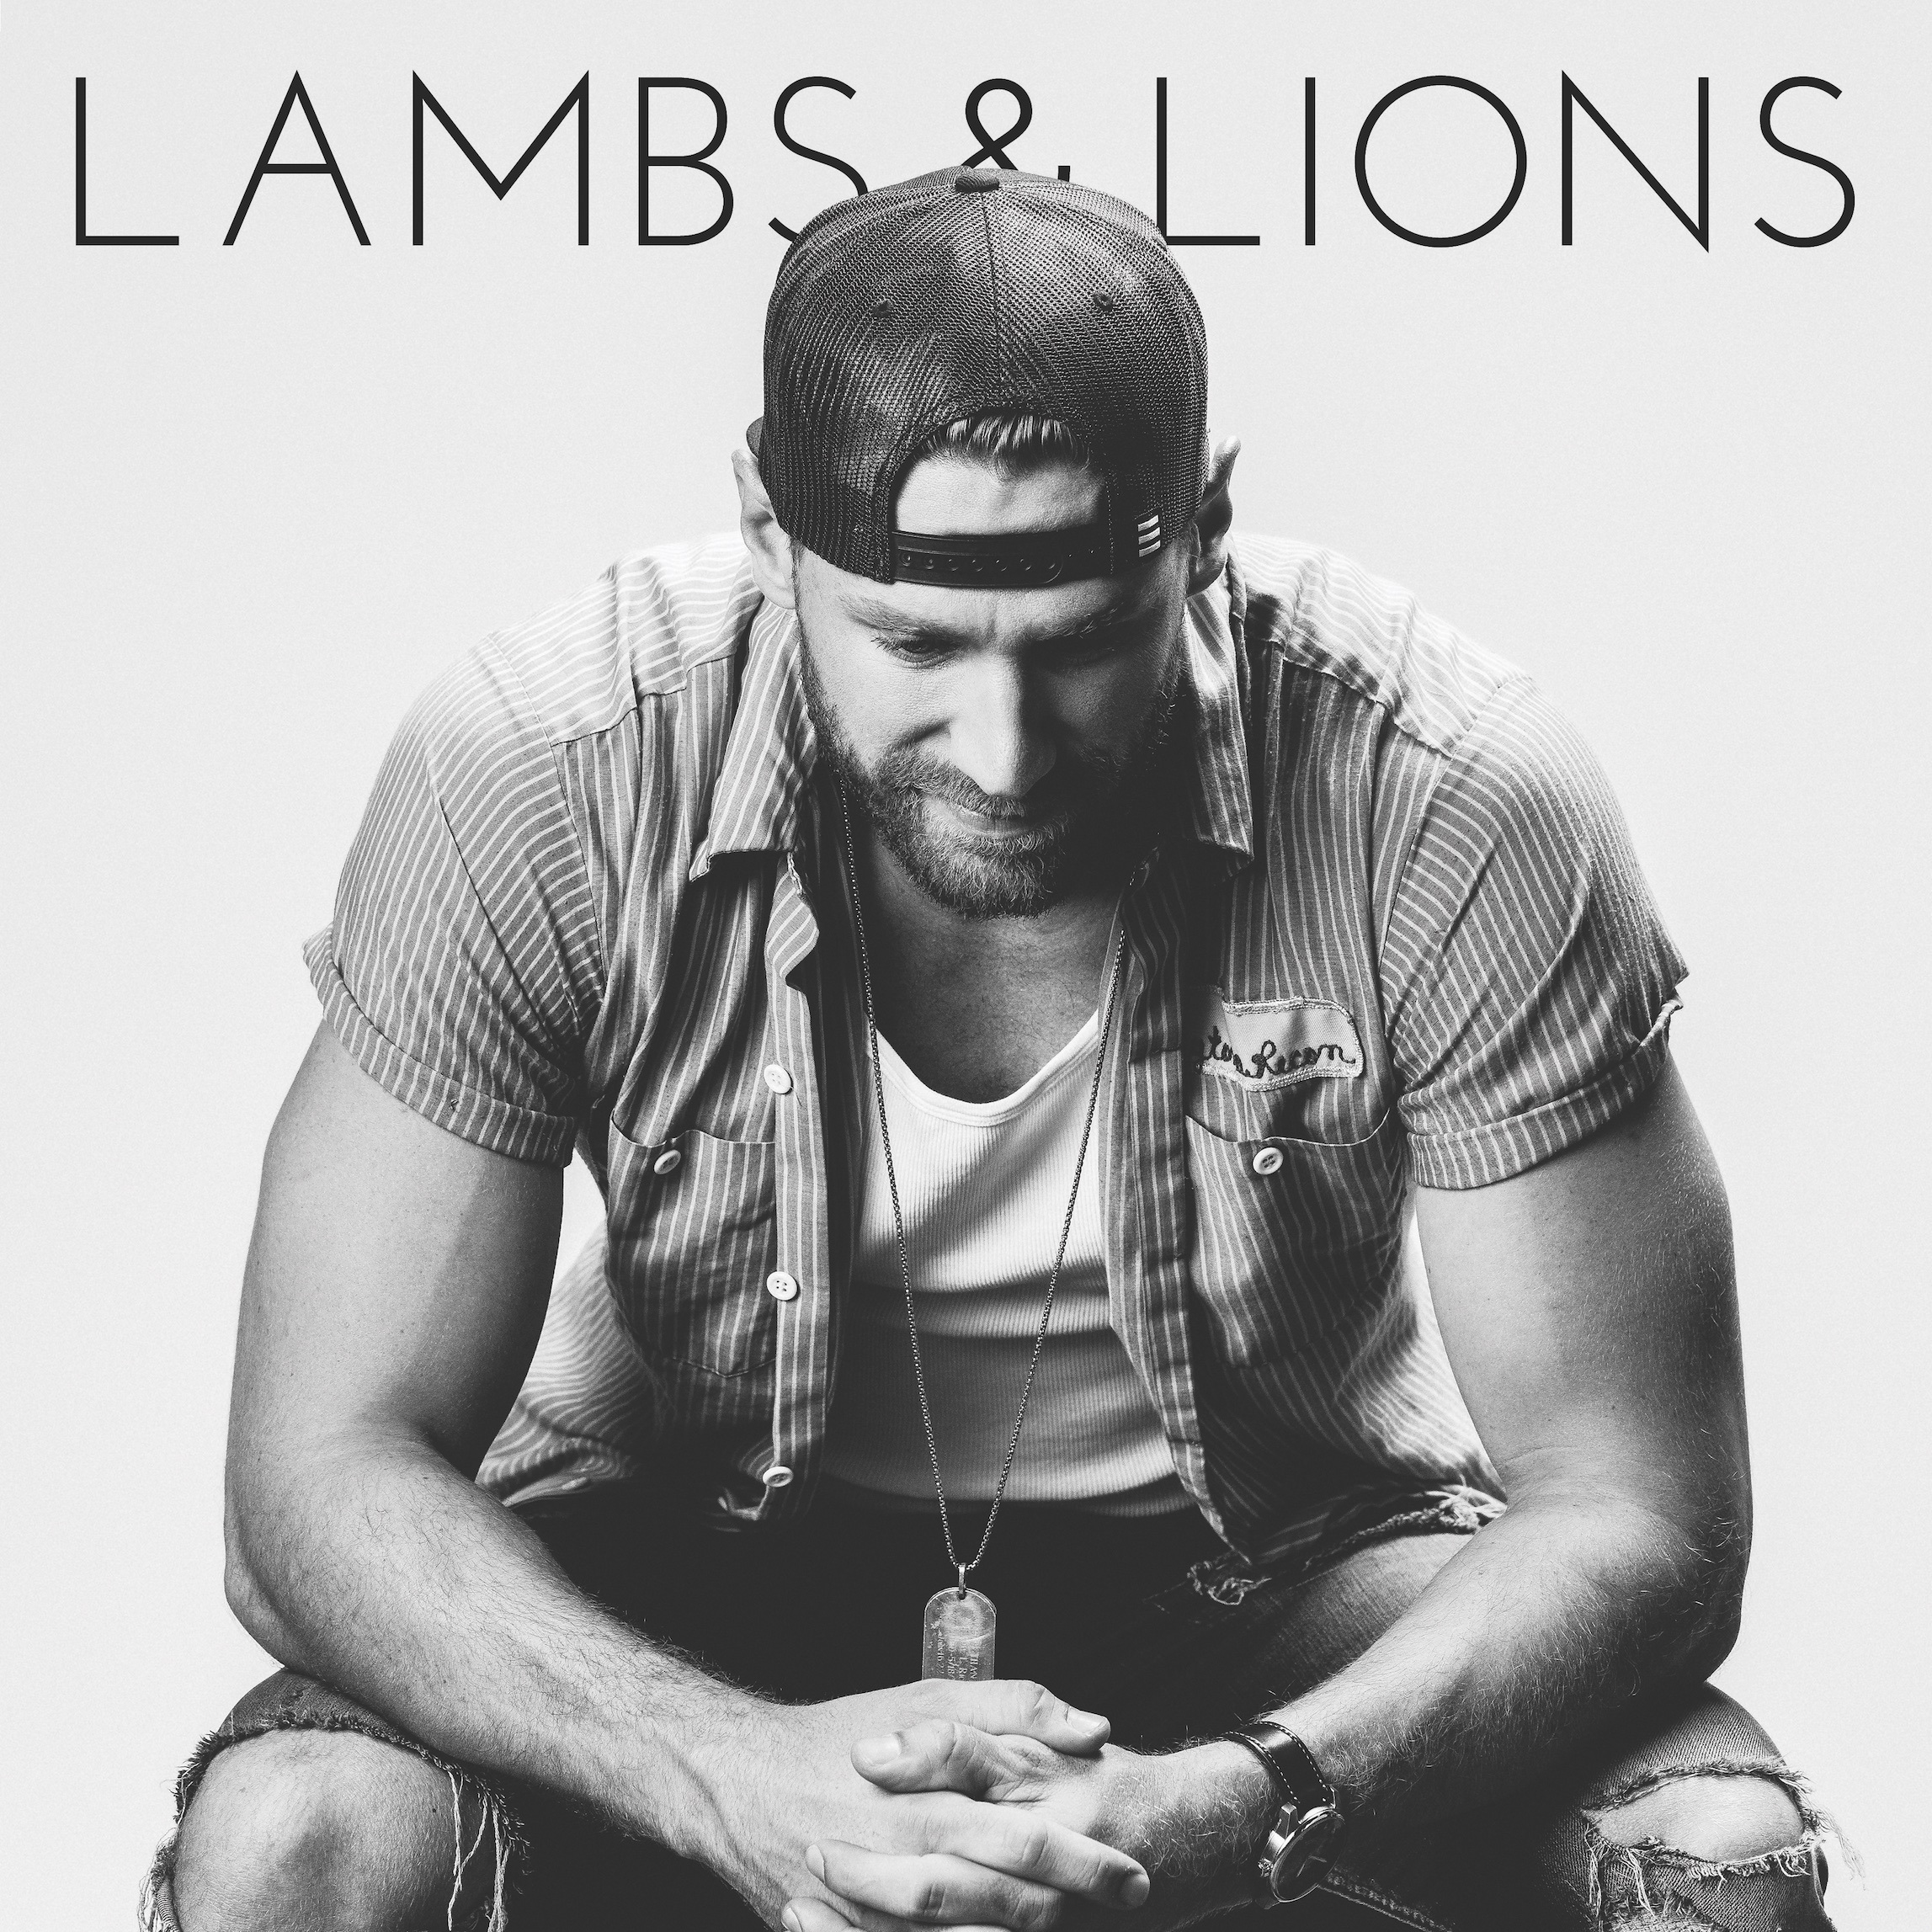 Chase Rice Shares Track List, Album Release Date for 'Lambs & Lions